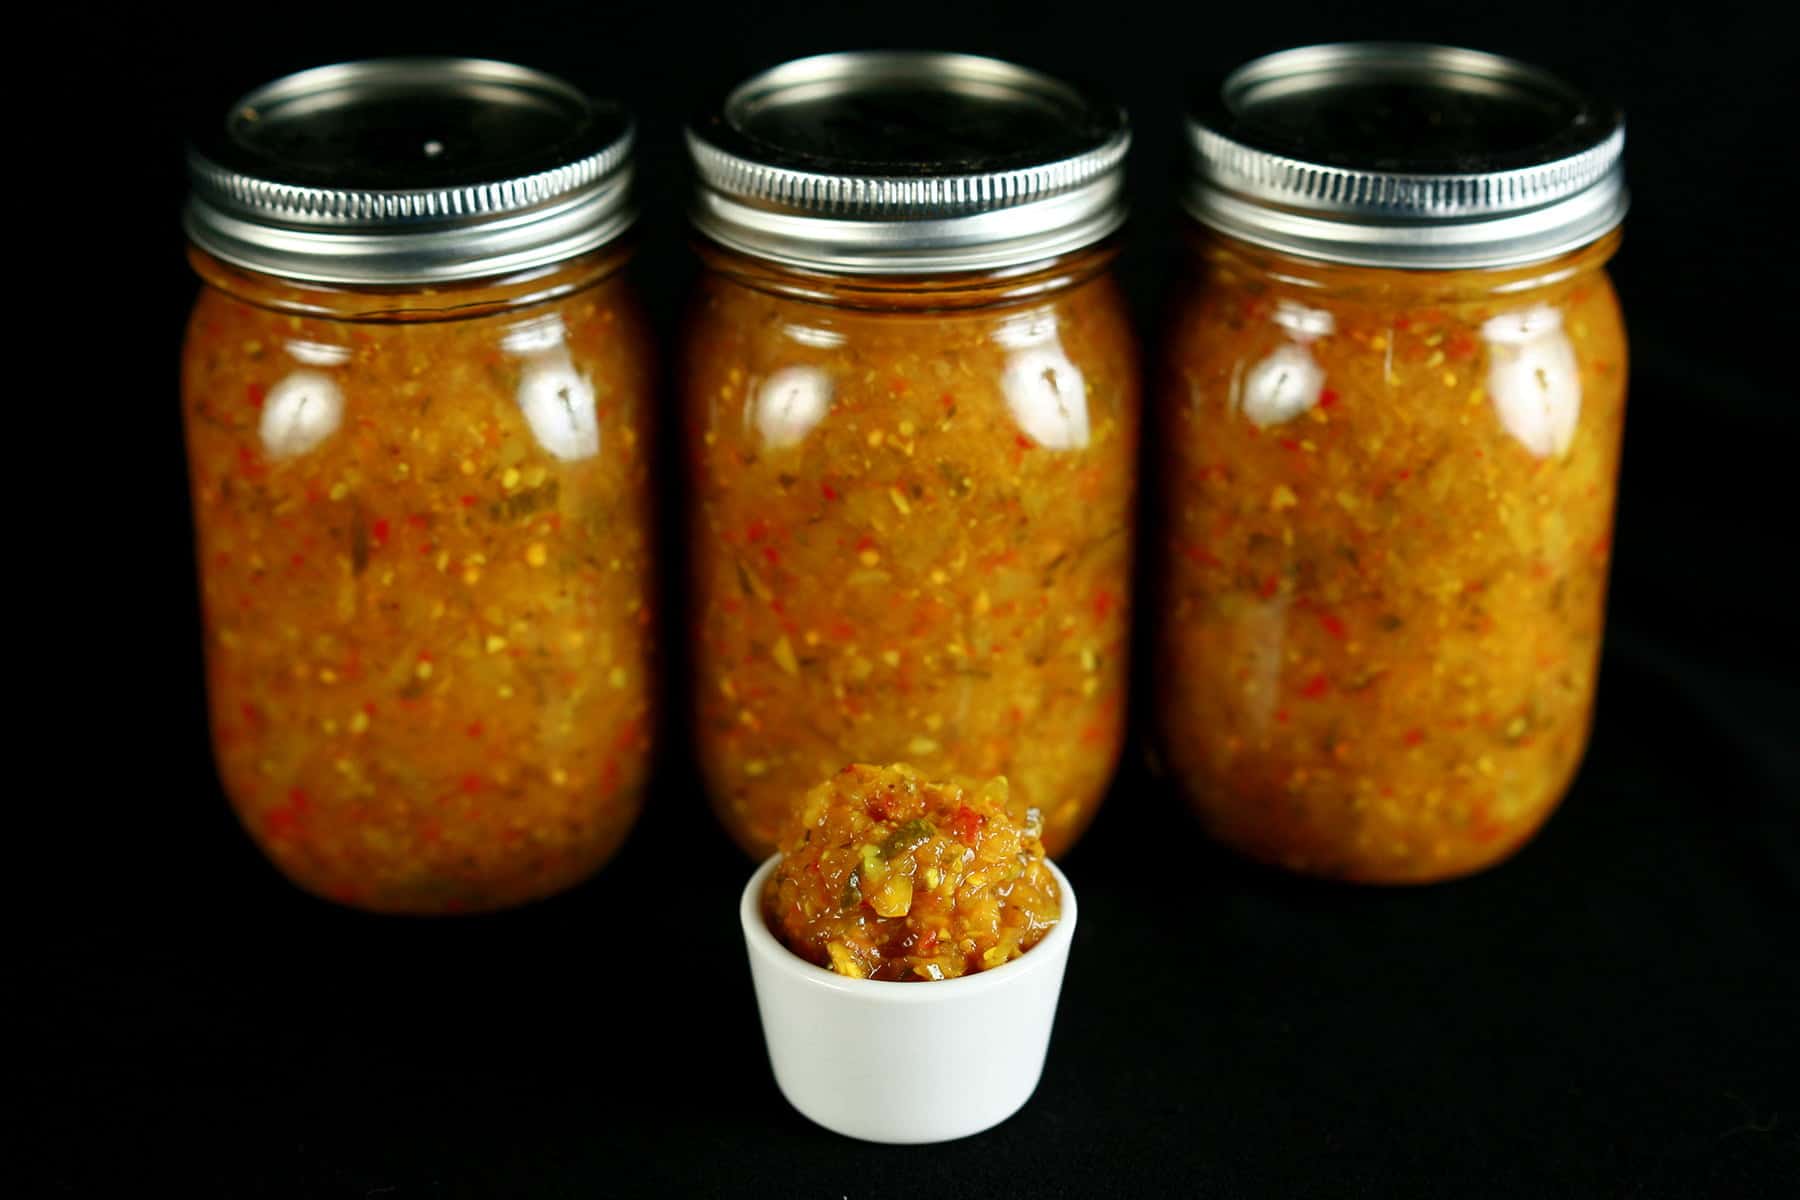 3 jars of Hoppy Dill Pickle Relish. It's a golden orange relish with flecks of dark green and red throughout. There is a small cup of the relish in front of the jars.